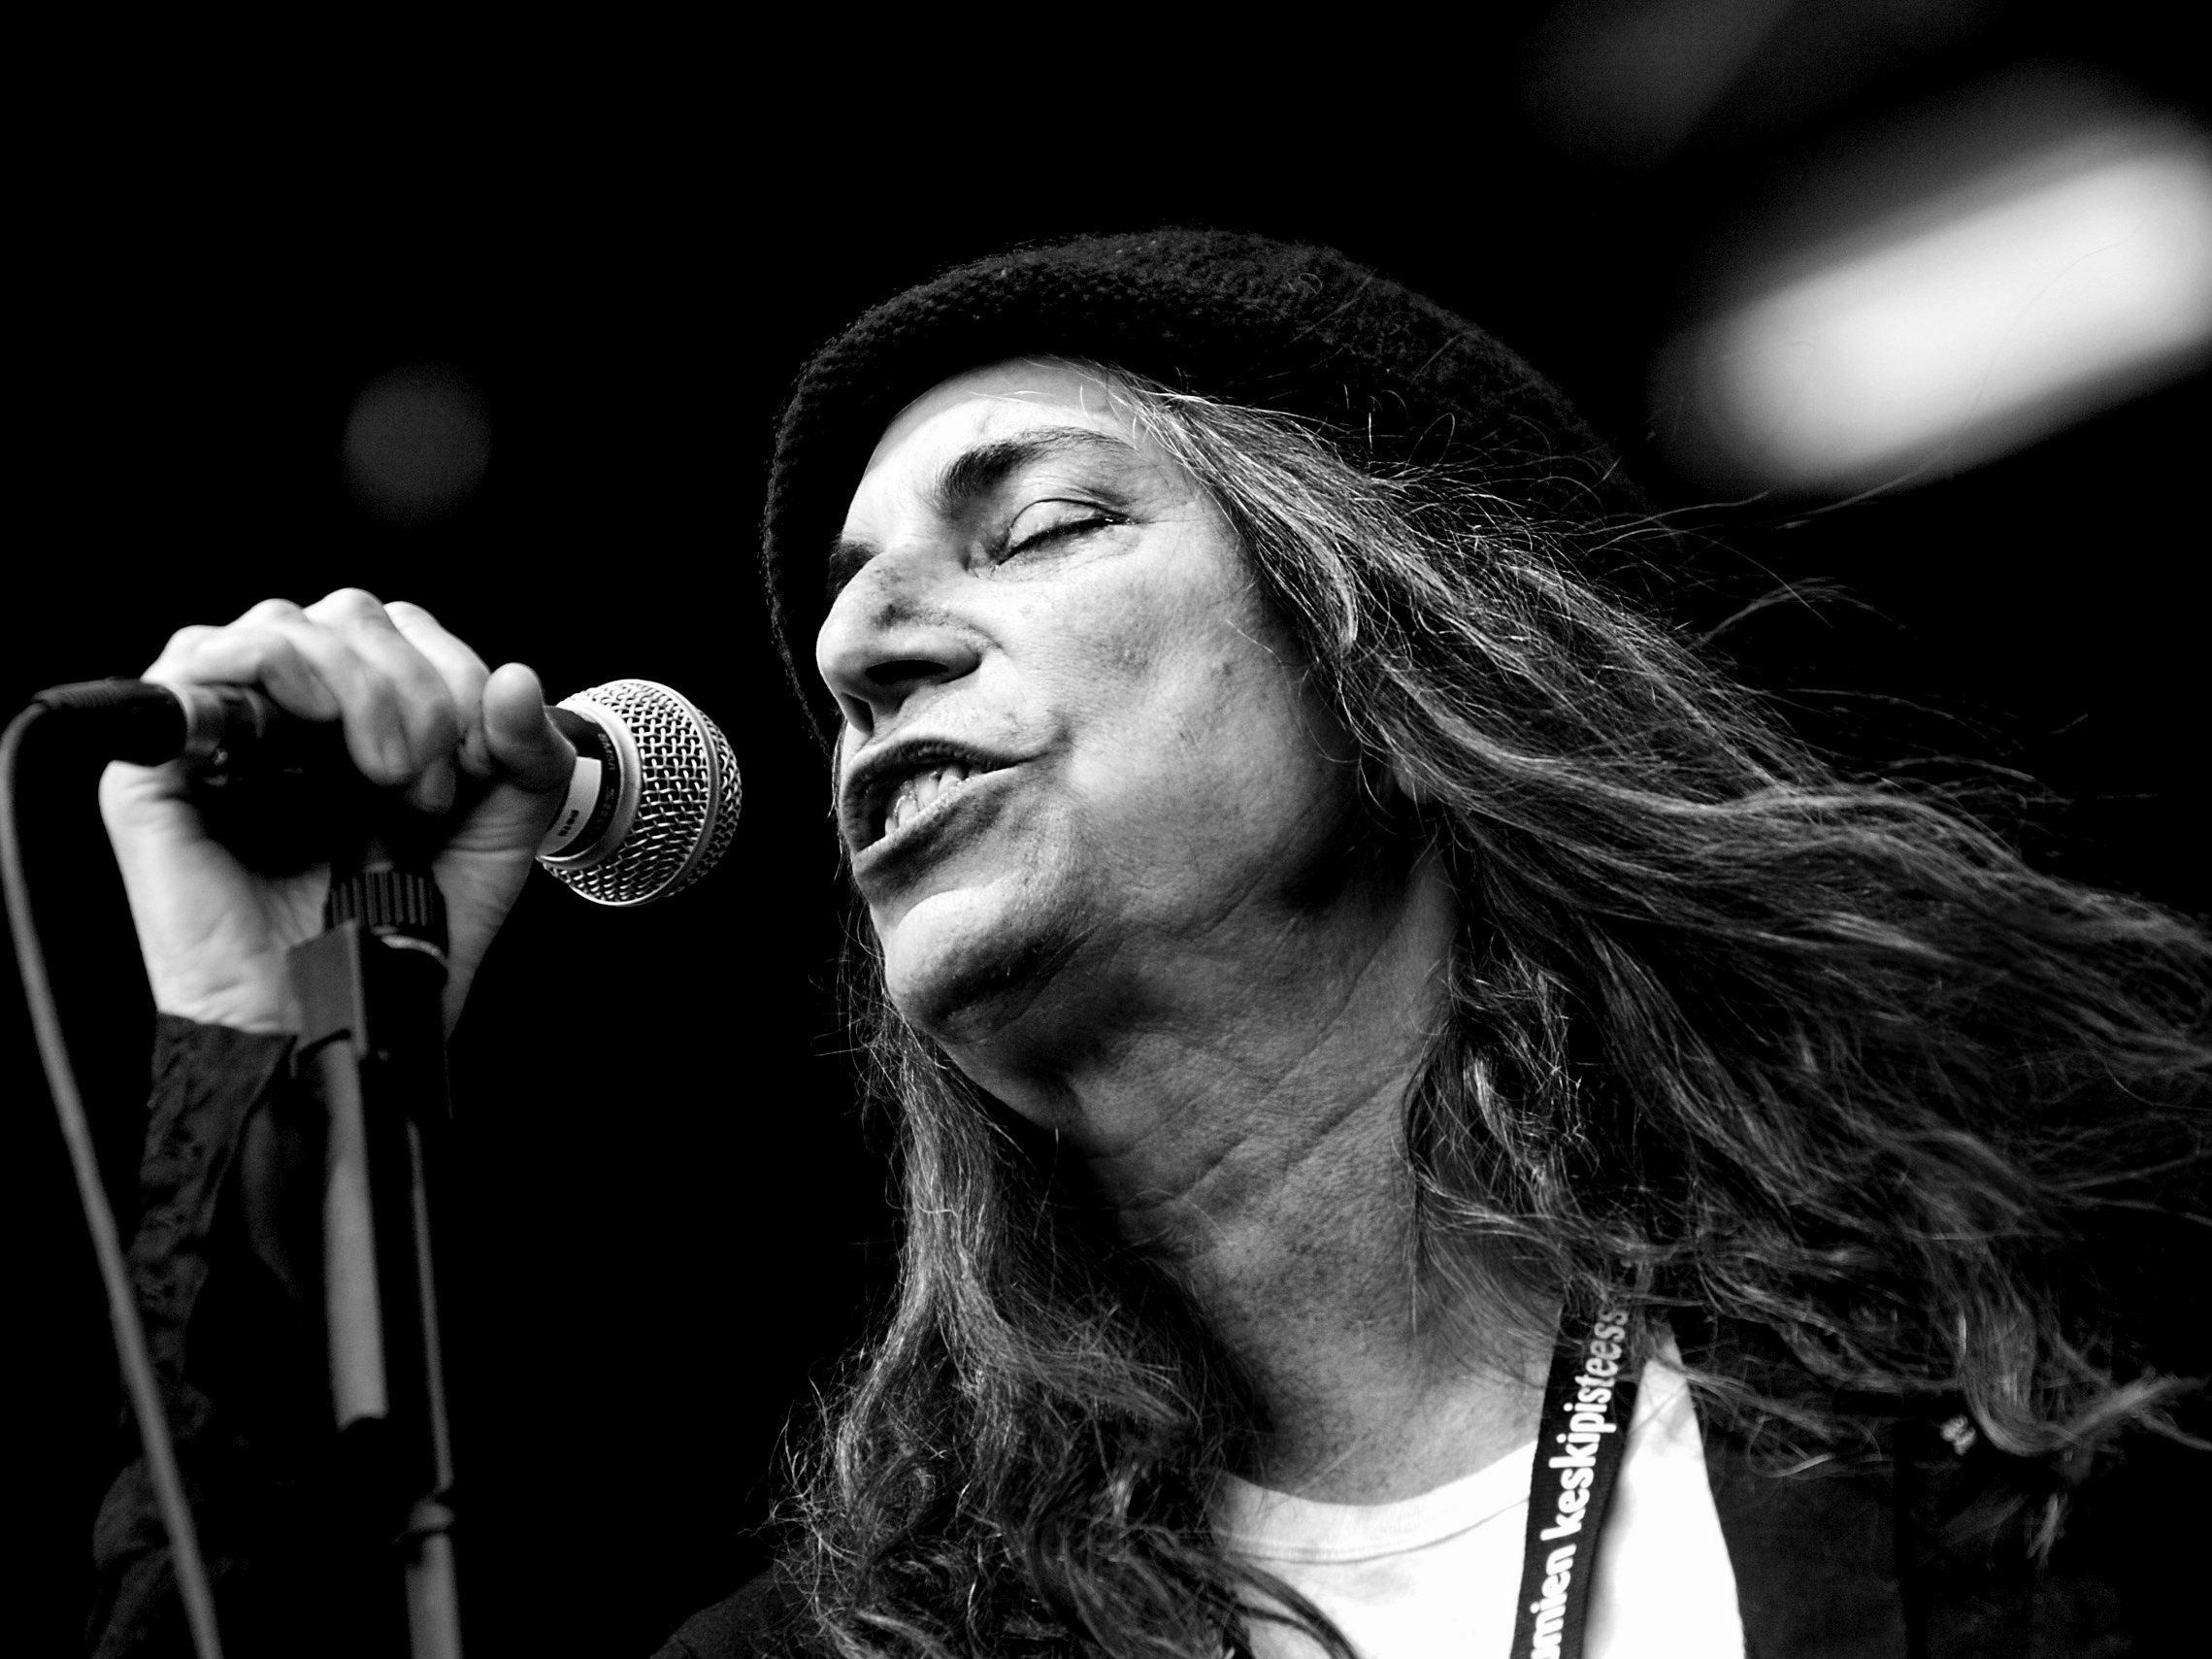 patti_smith_performing_in_finland_2007.jpg